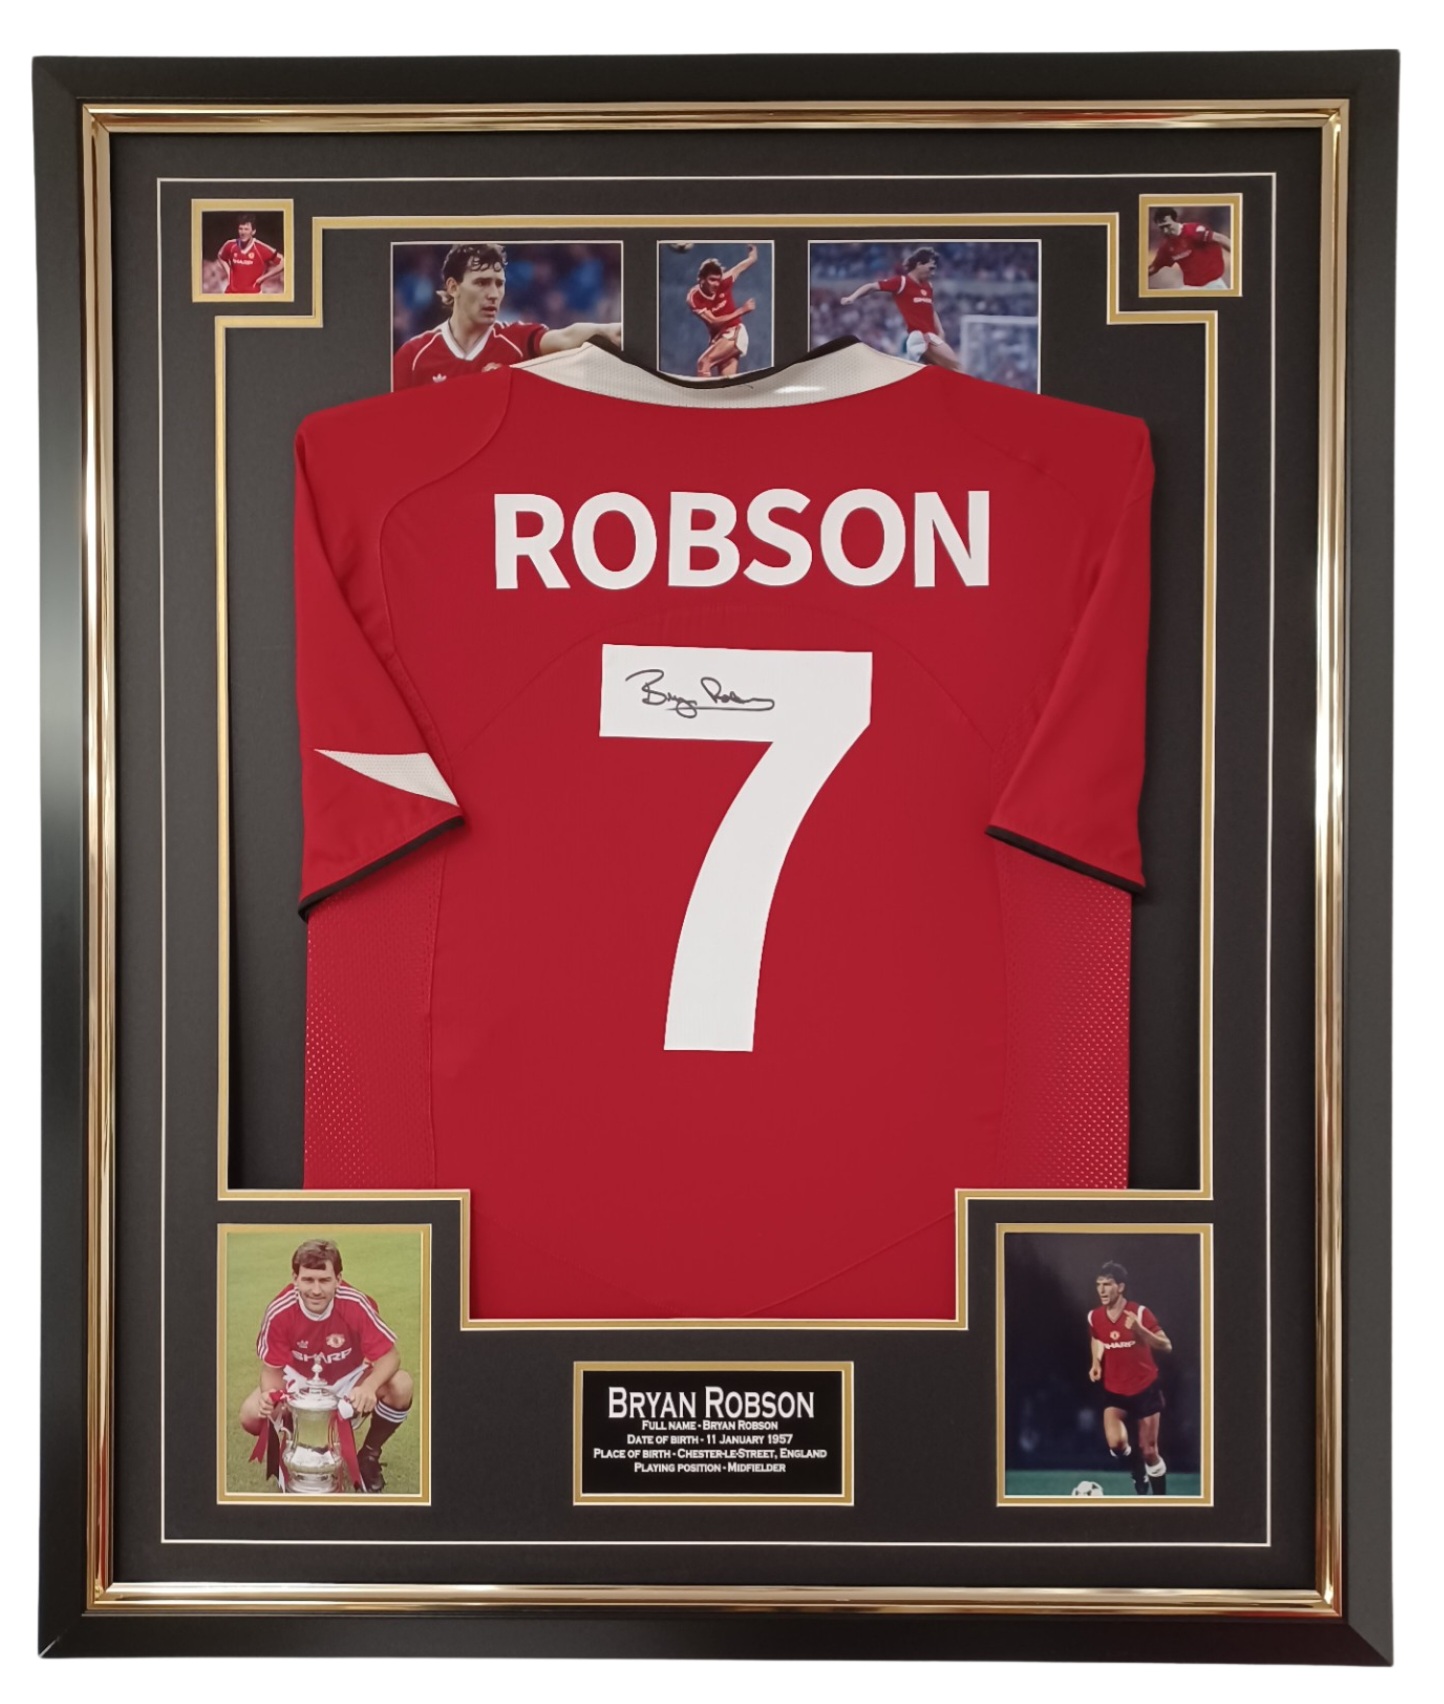 Bryan Robson of Manchester United Signed Jersey | Signed Memorabila ...